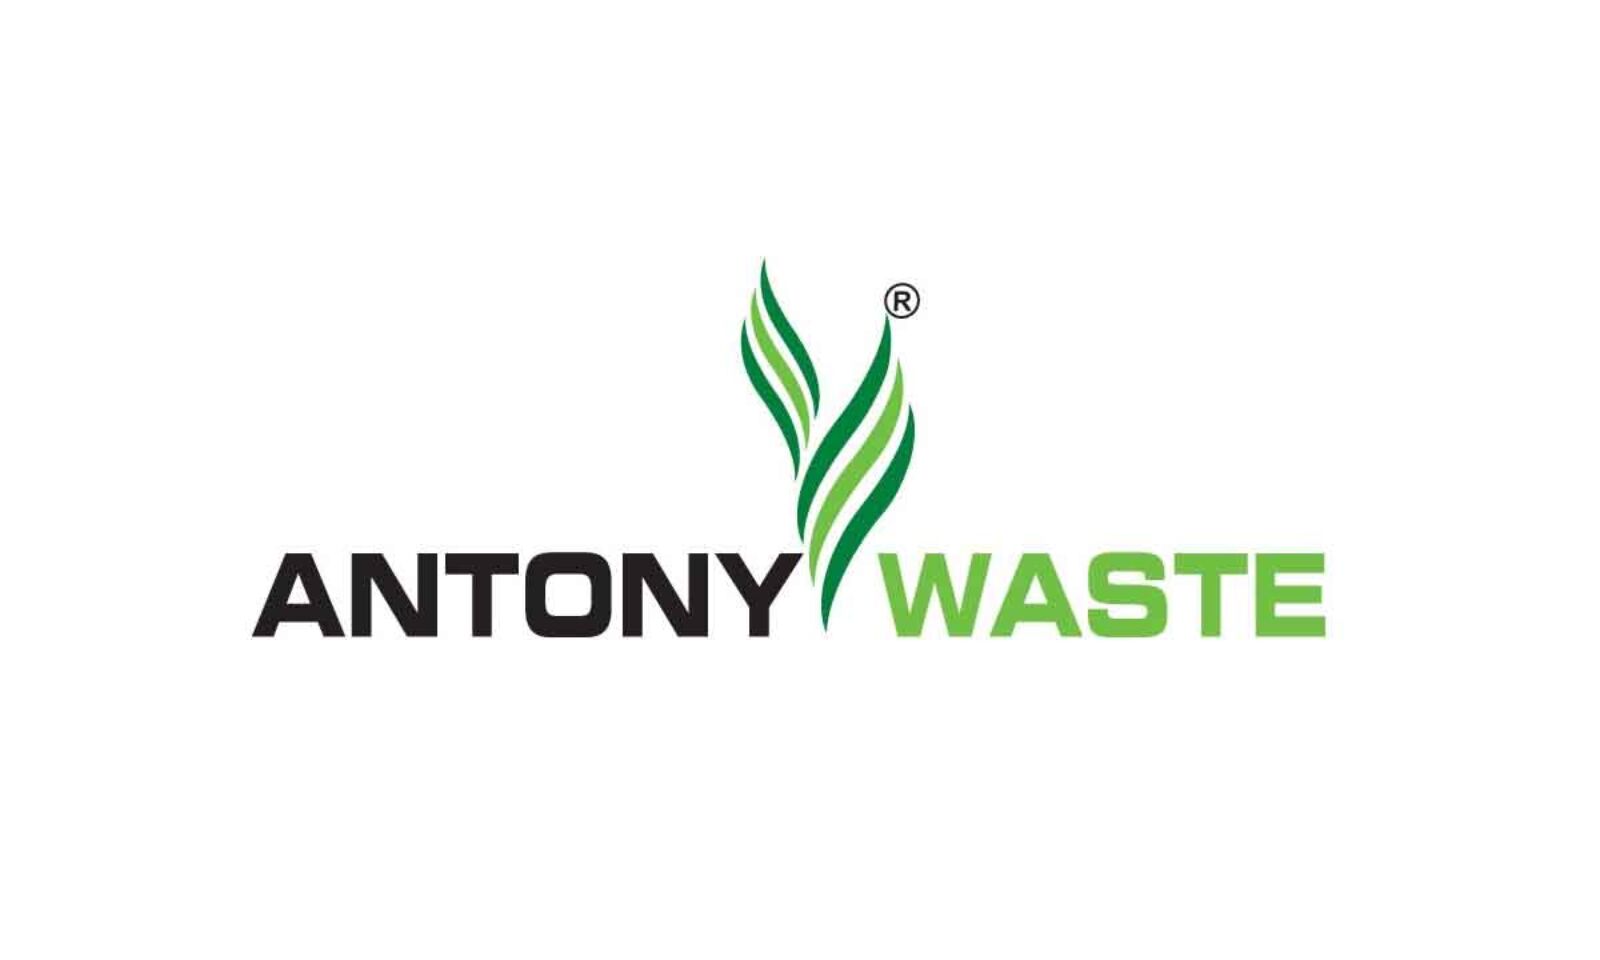 Why Antony Waste Share Price Falling